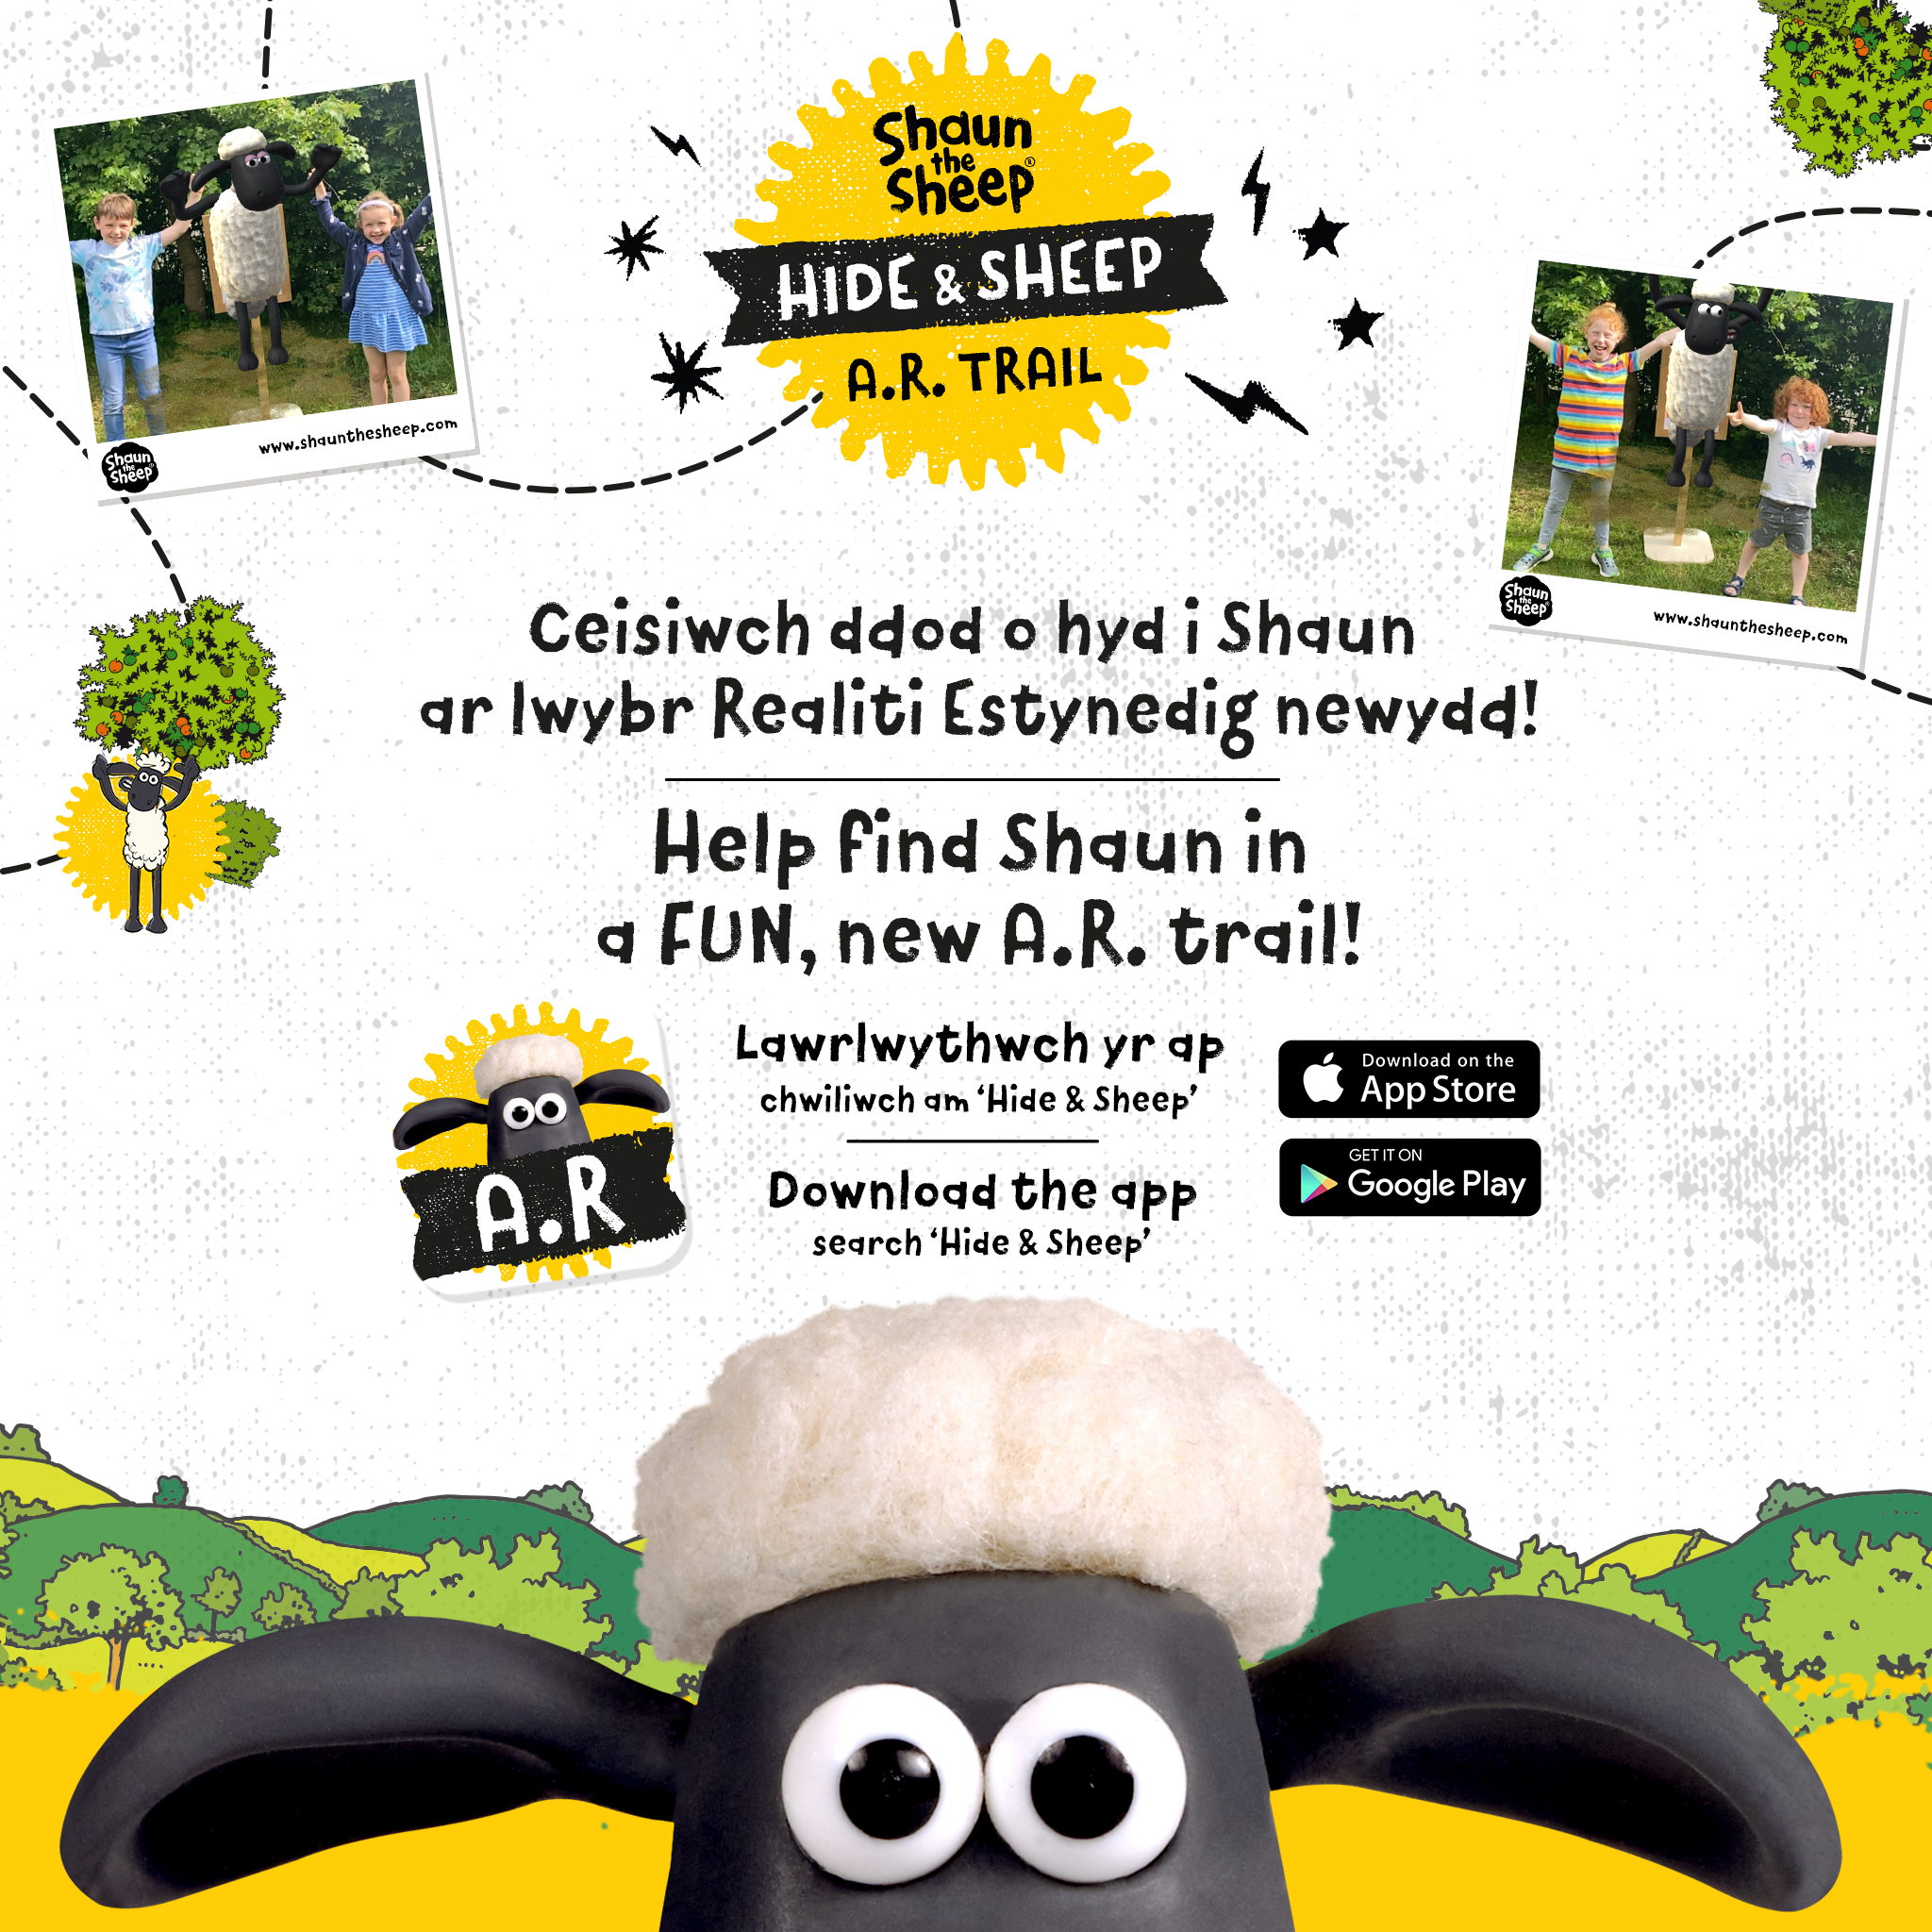 The family based ‘Hide & Sheep’ trail brings to life the much-loved character Shaun the Sheep who was developed by Aardman.